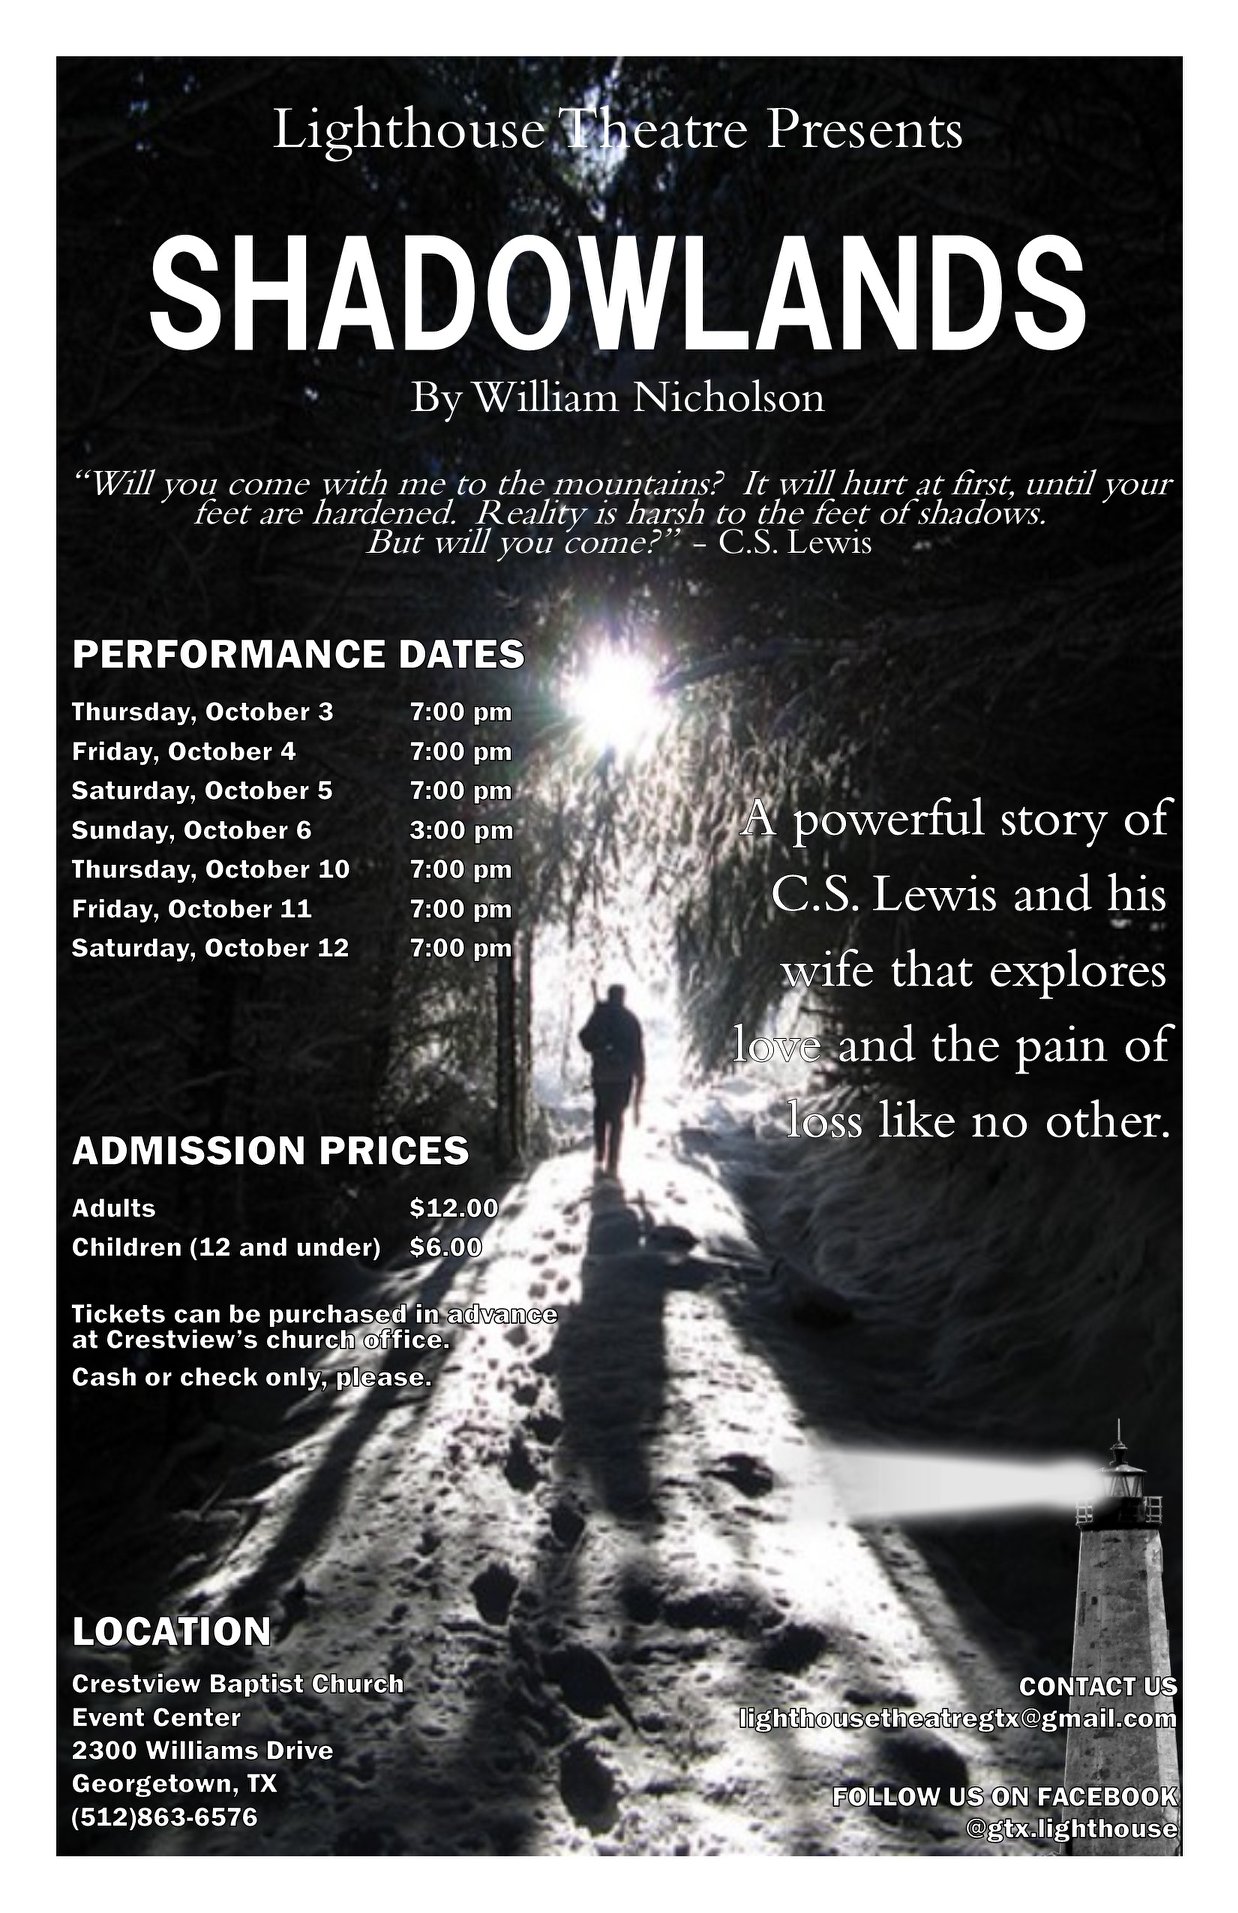 Shadowlands by Lighthouse Theatre